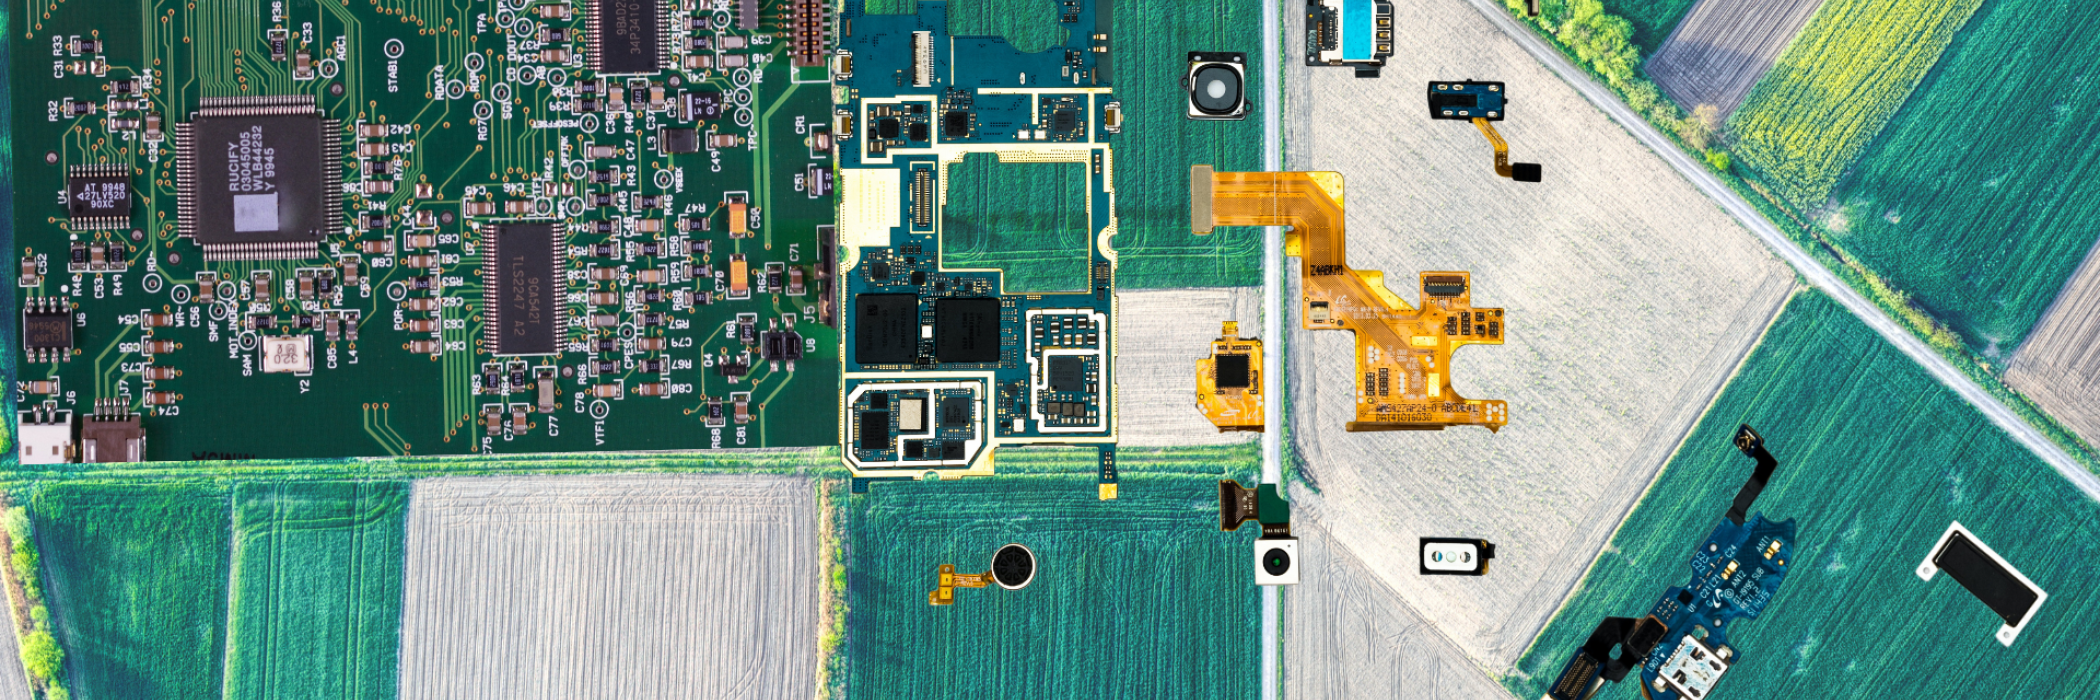 areal view of green fields overlayed with parts of electronic equipment